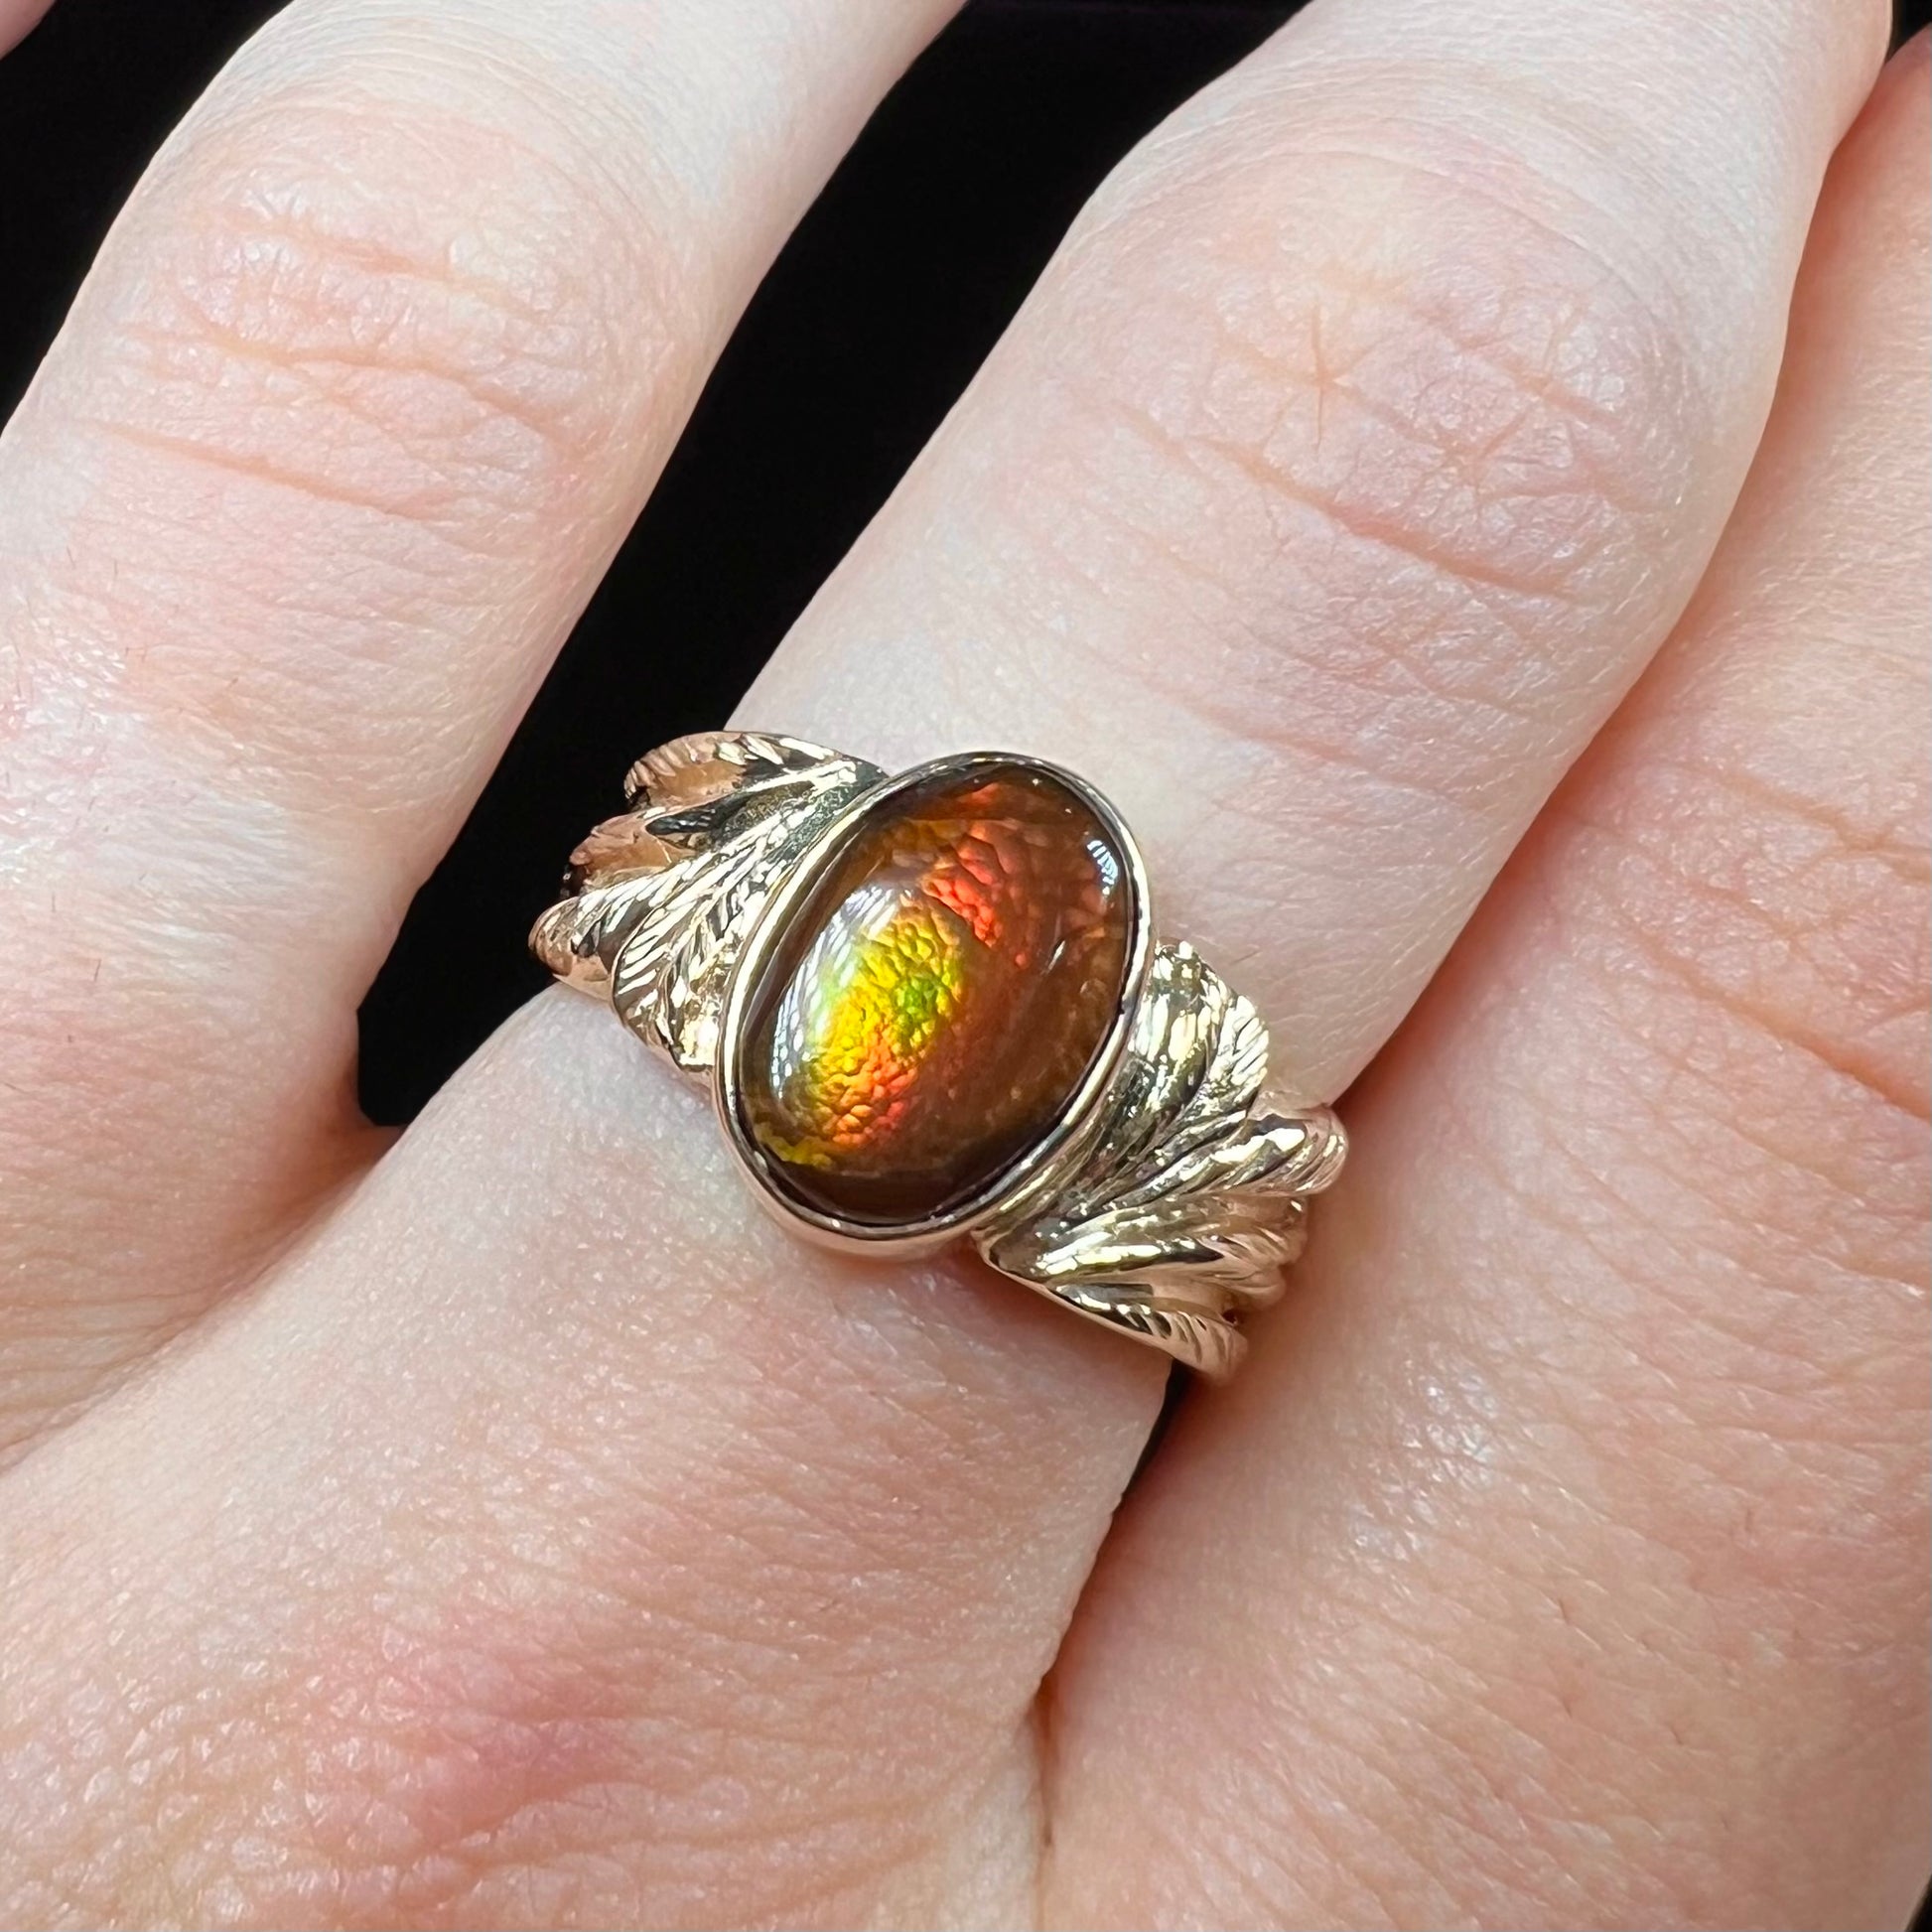 A unisex oval cabochon cut fire agate ring cast in yellow gold.  The stone flashes green and red colors.